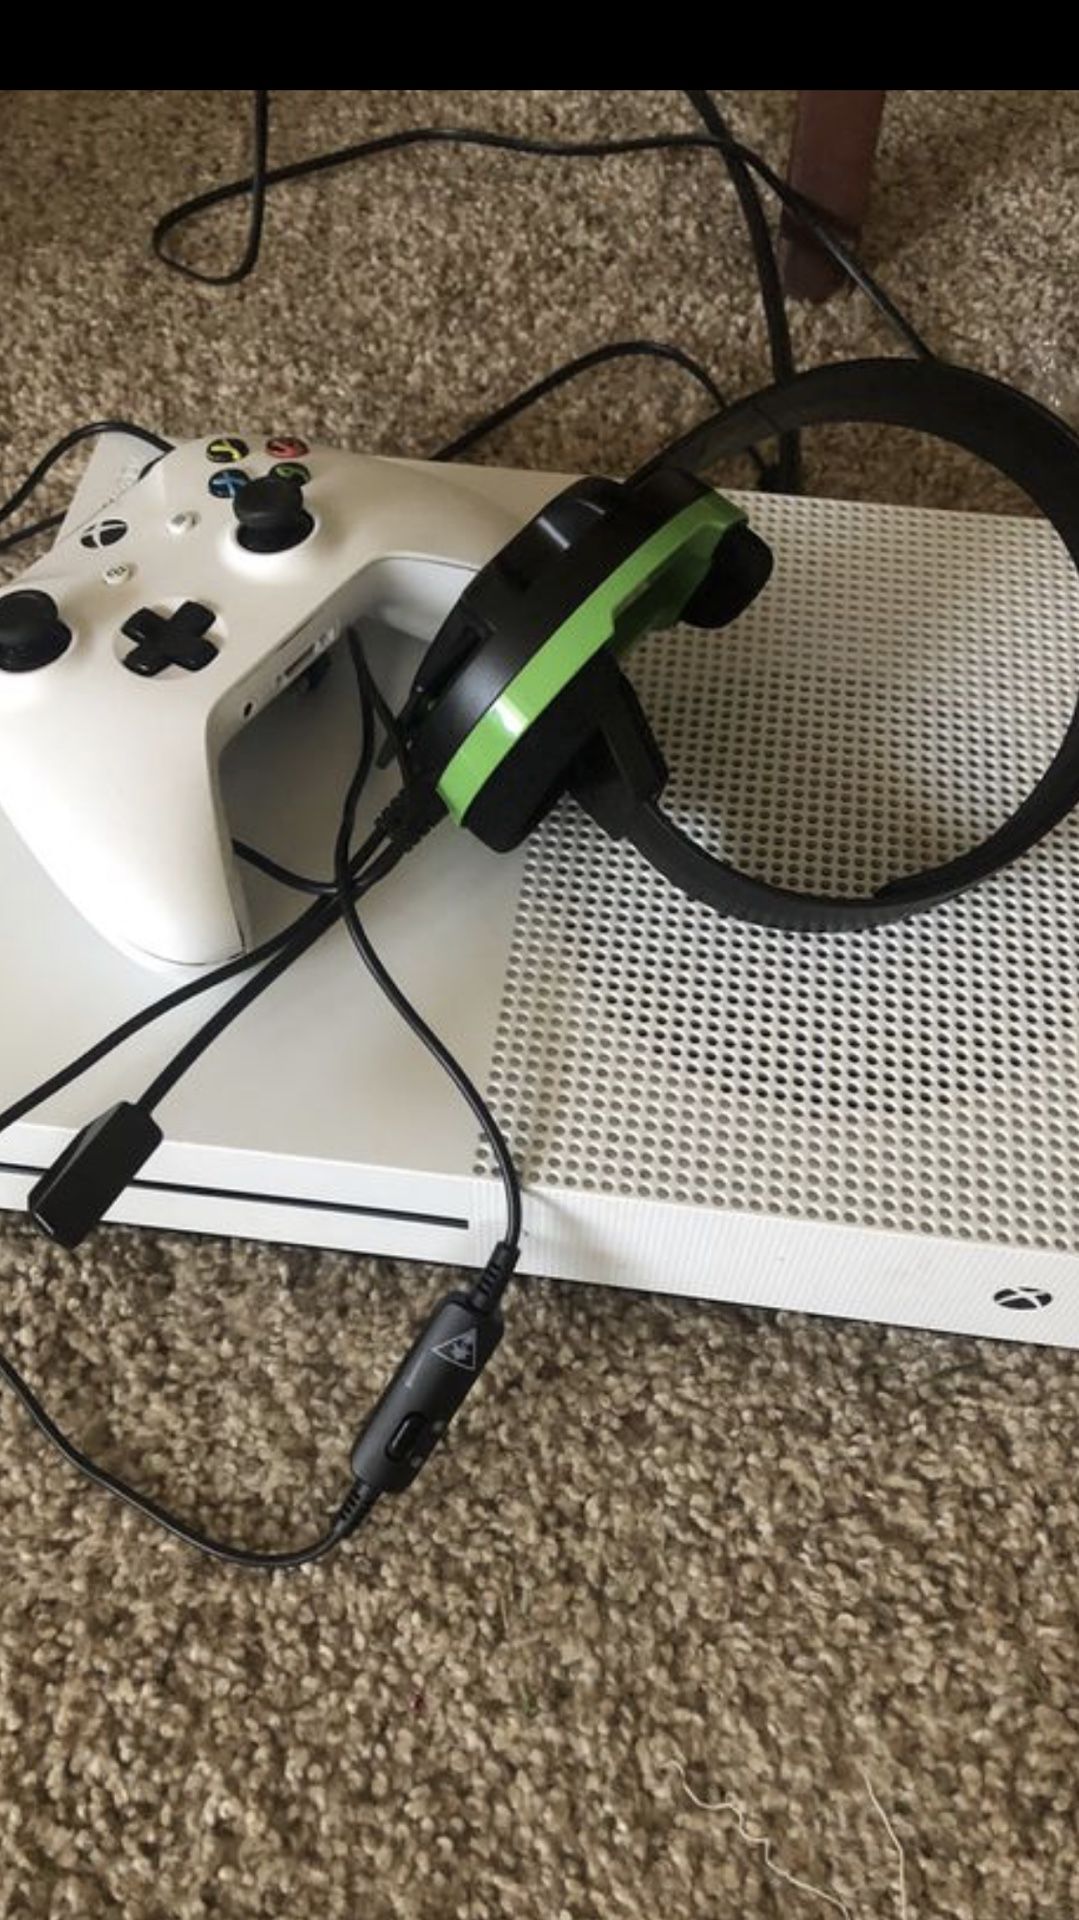 Xbox one s almost like brand new